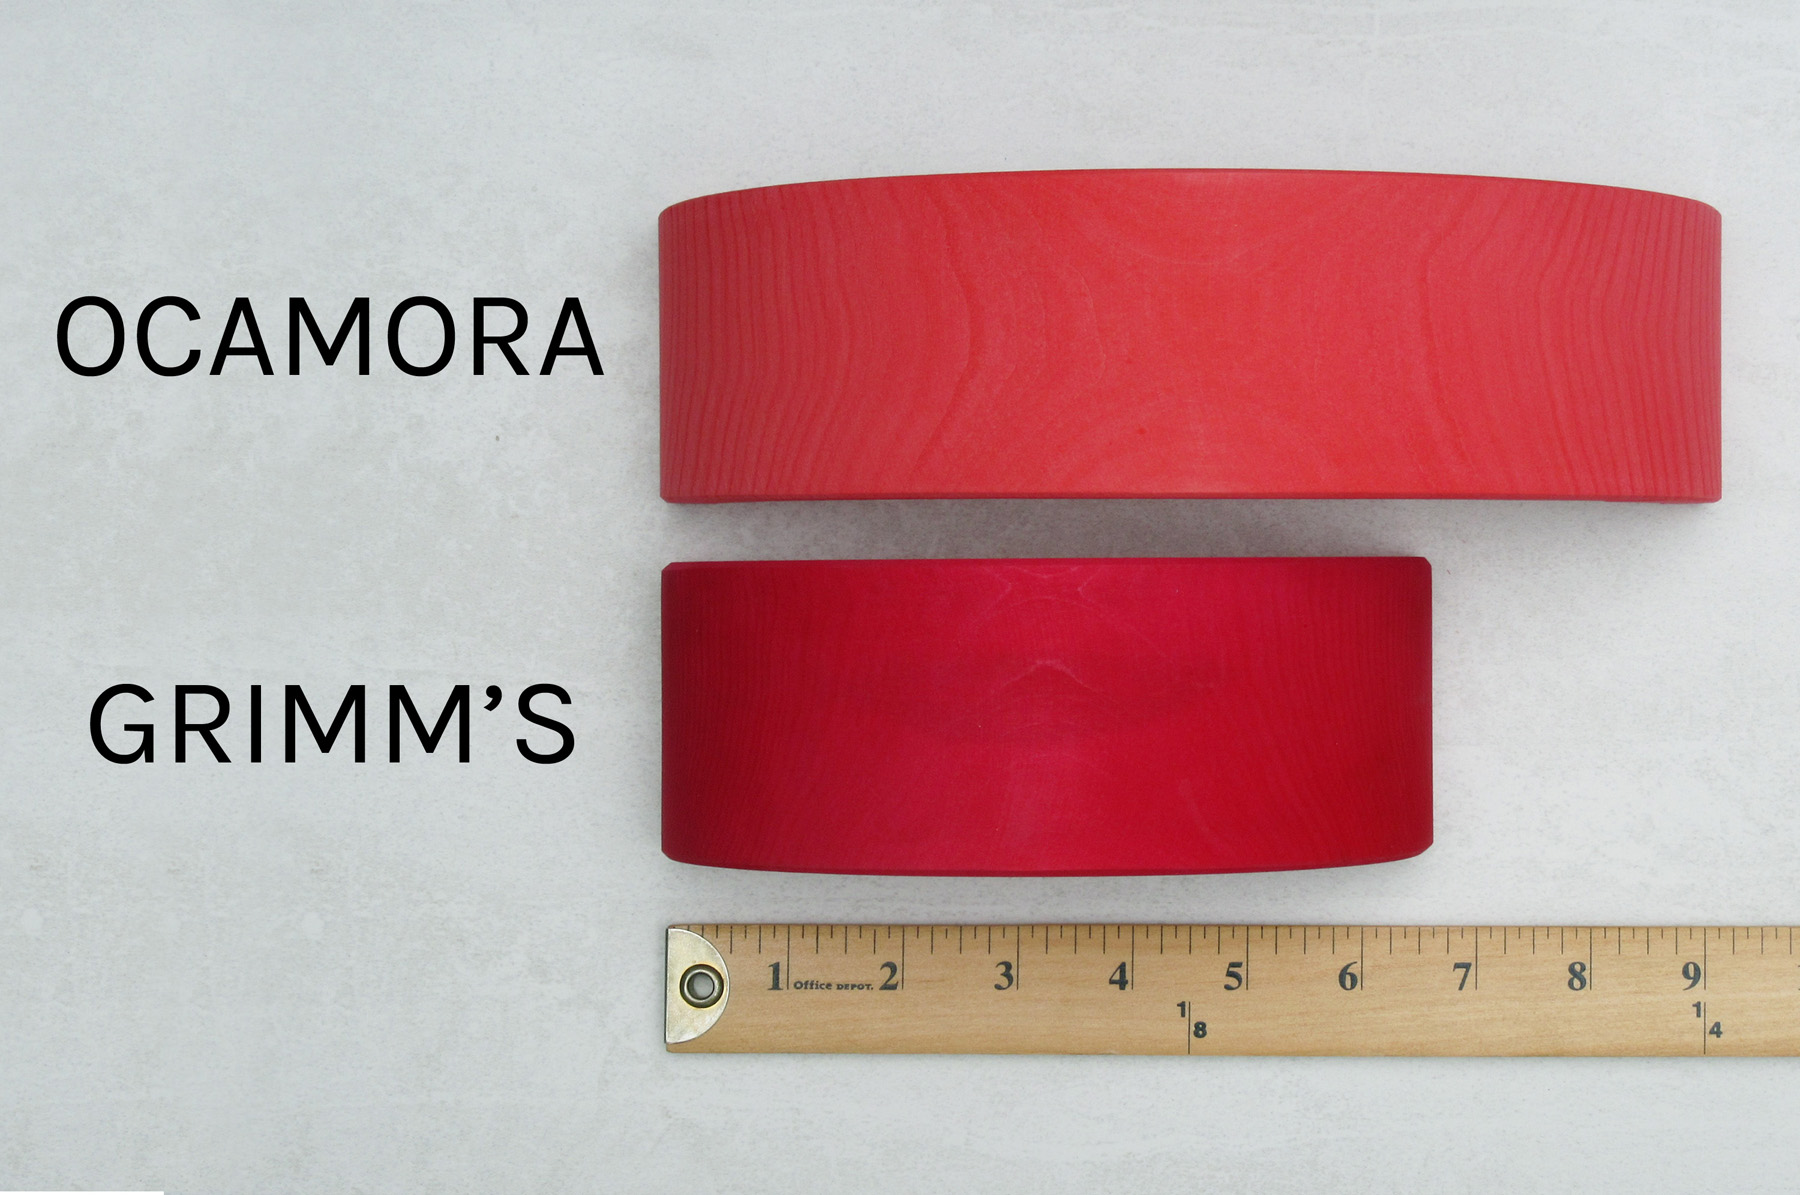 Grimms vs Ocamora Wooden Rainbow Stacker Toy Length Comparison